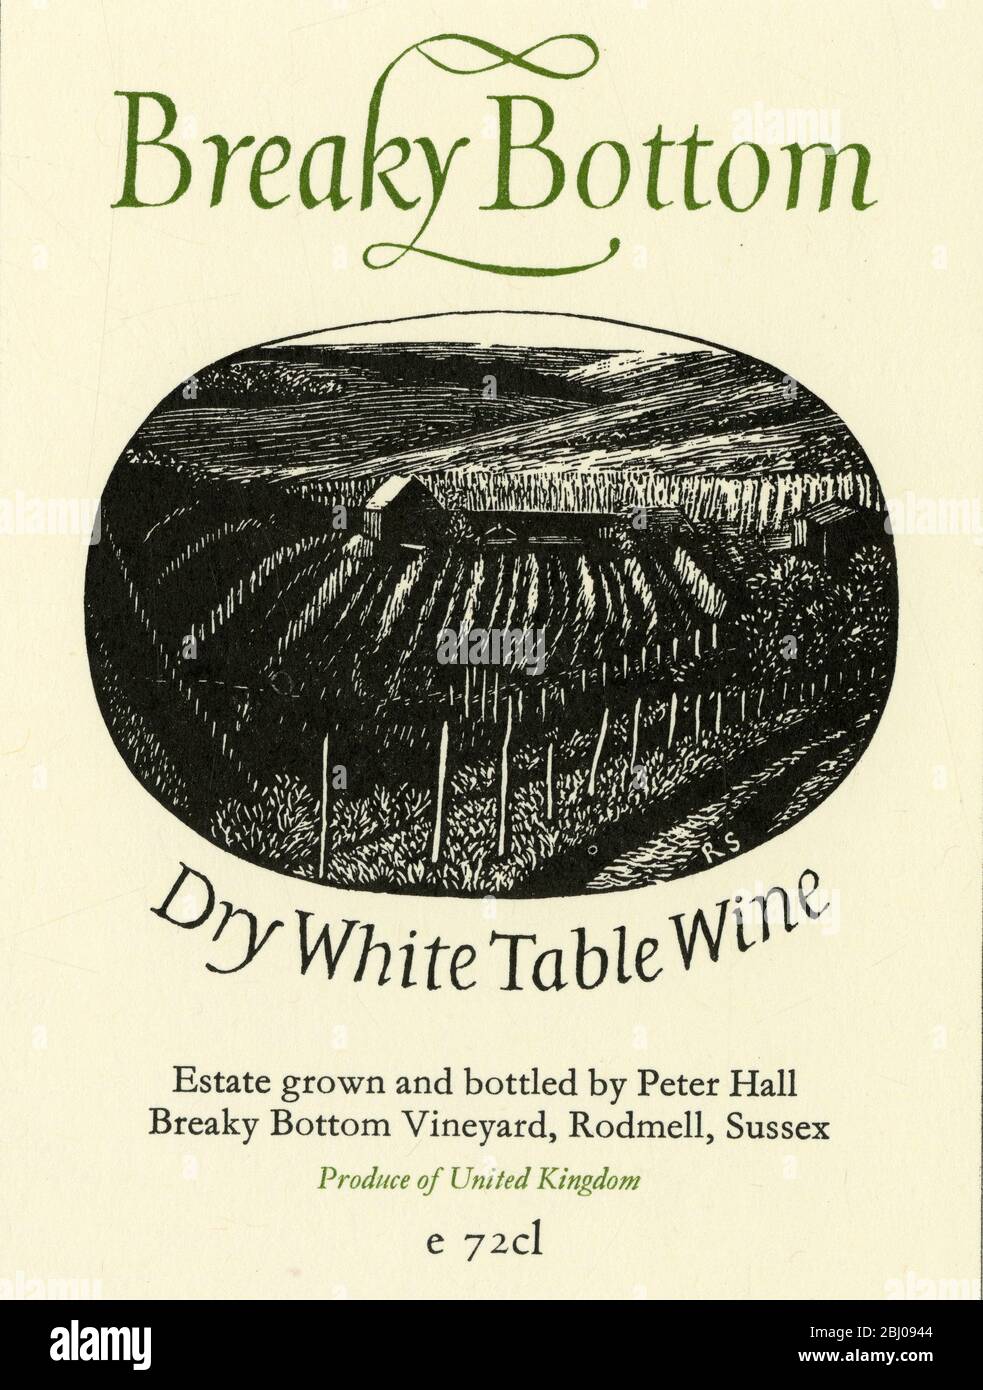 Wine Label. - Breaky Bottom. Dry White Table Wine. Estate Grown and Bottled by Peter Hall. - Breaky Bottom Vineyard, Rodmell, Sussex. - Produce of the UK. Stock Photo